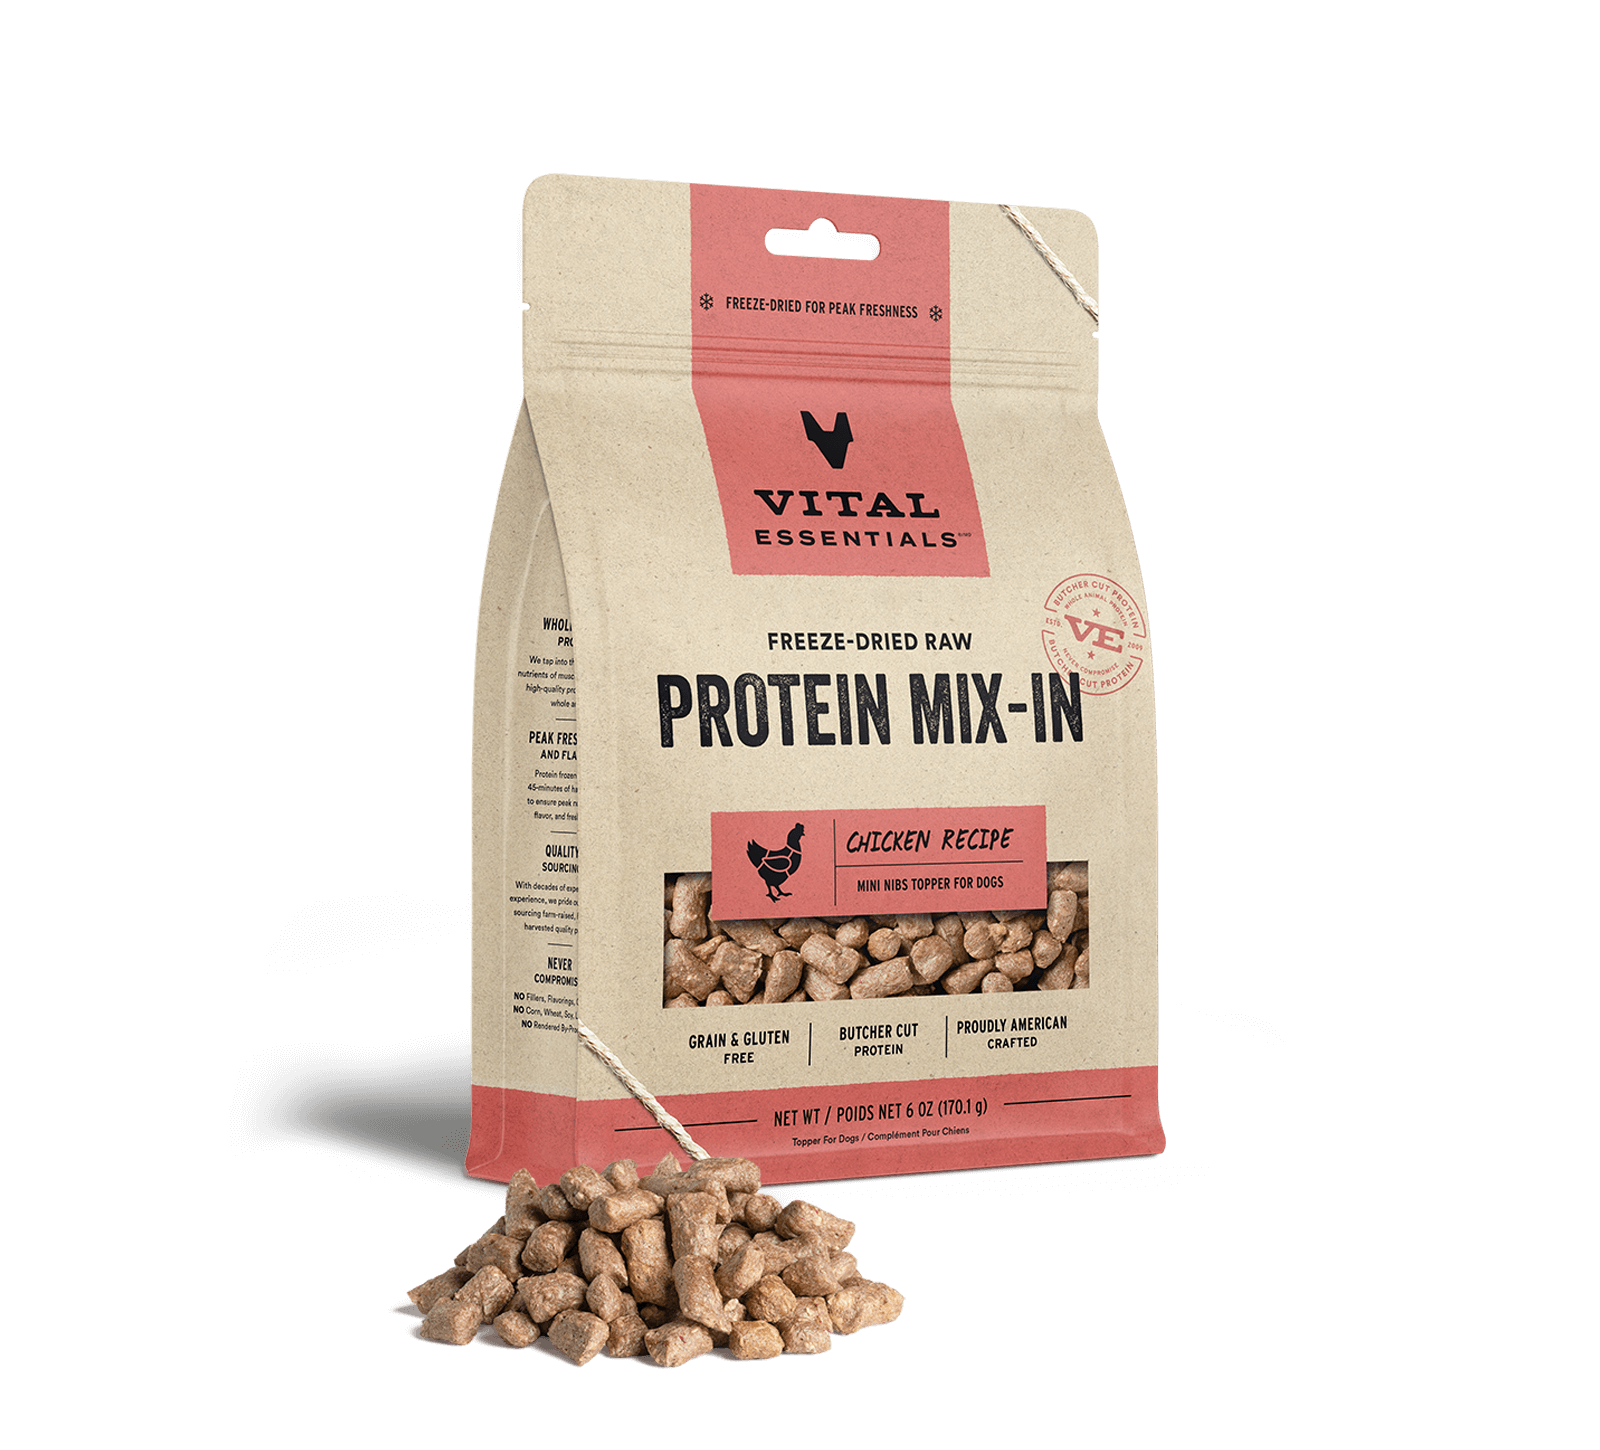 Vital Essentials Freeze-Dried Raw Protein Mix-In Chicken Recipe Mini Nibs Topper for Dogs, 6 oz - Healing/First Aid